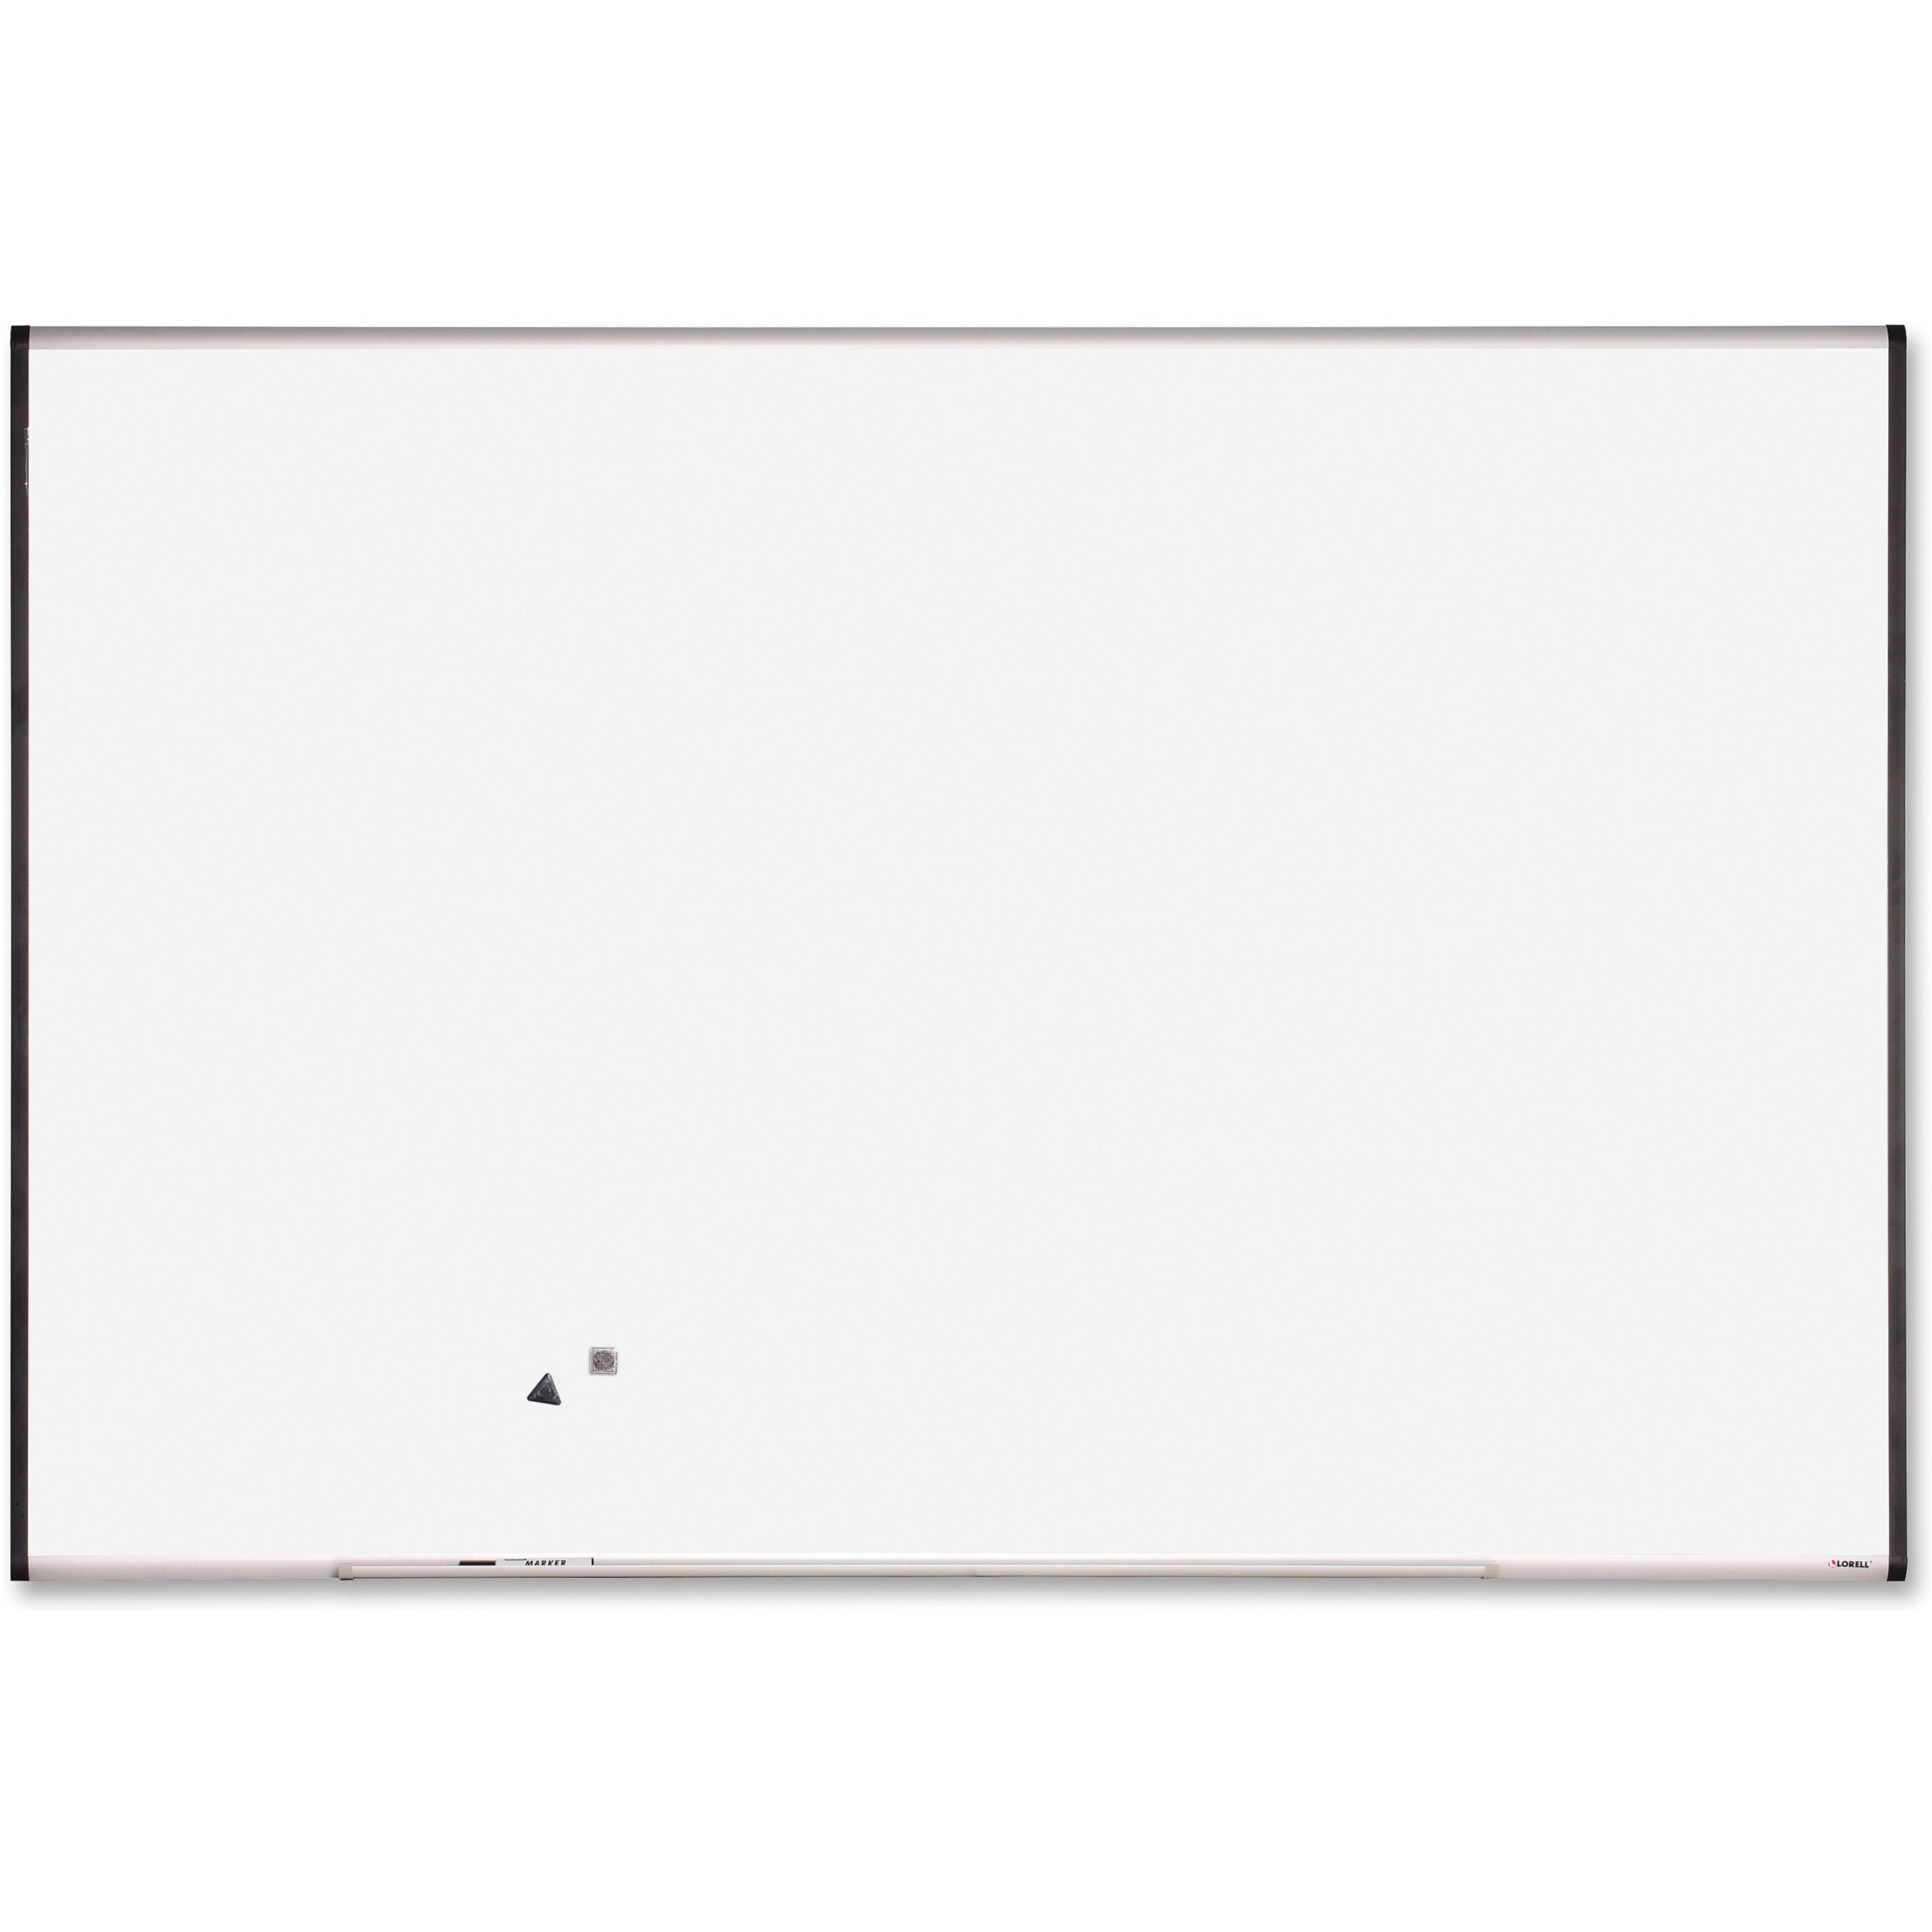 Lorell Signature Series Magnetic Dry-erase Markerboard - 72" (6 ft) Width x 48" (4 ft) Height - Coated Steel Surface - Silver, Ebony Frame - Magnetic - 1 Each - 